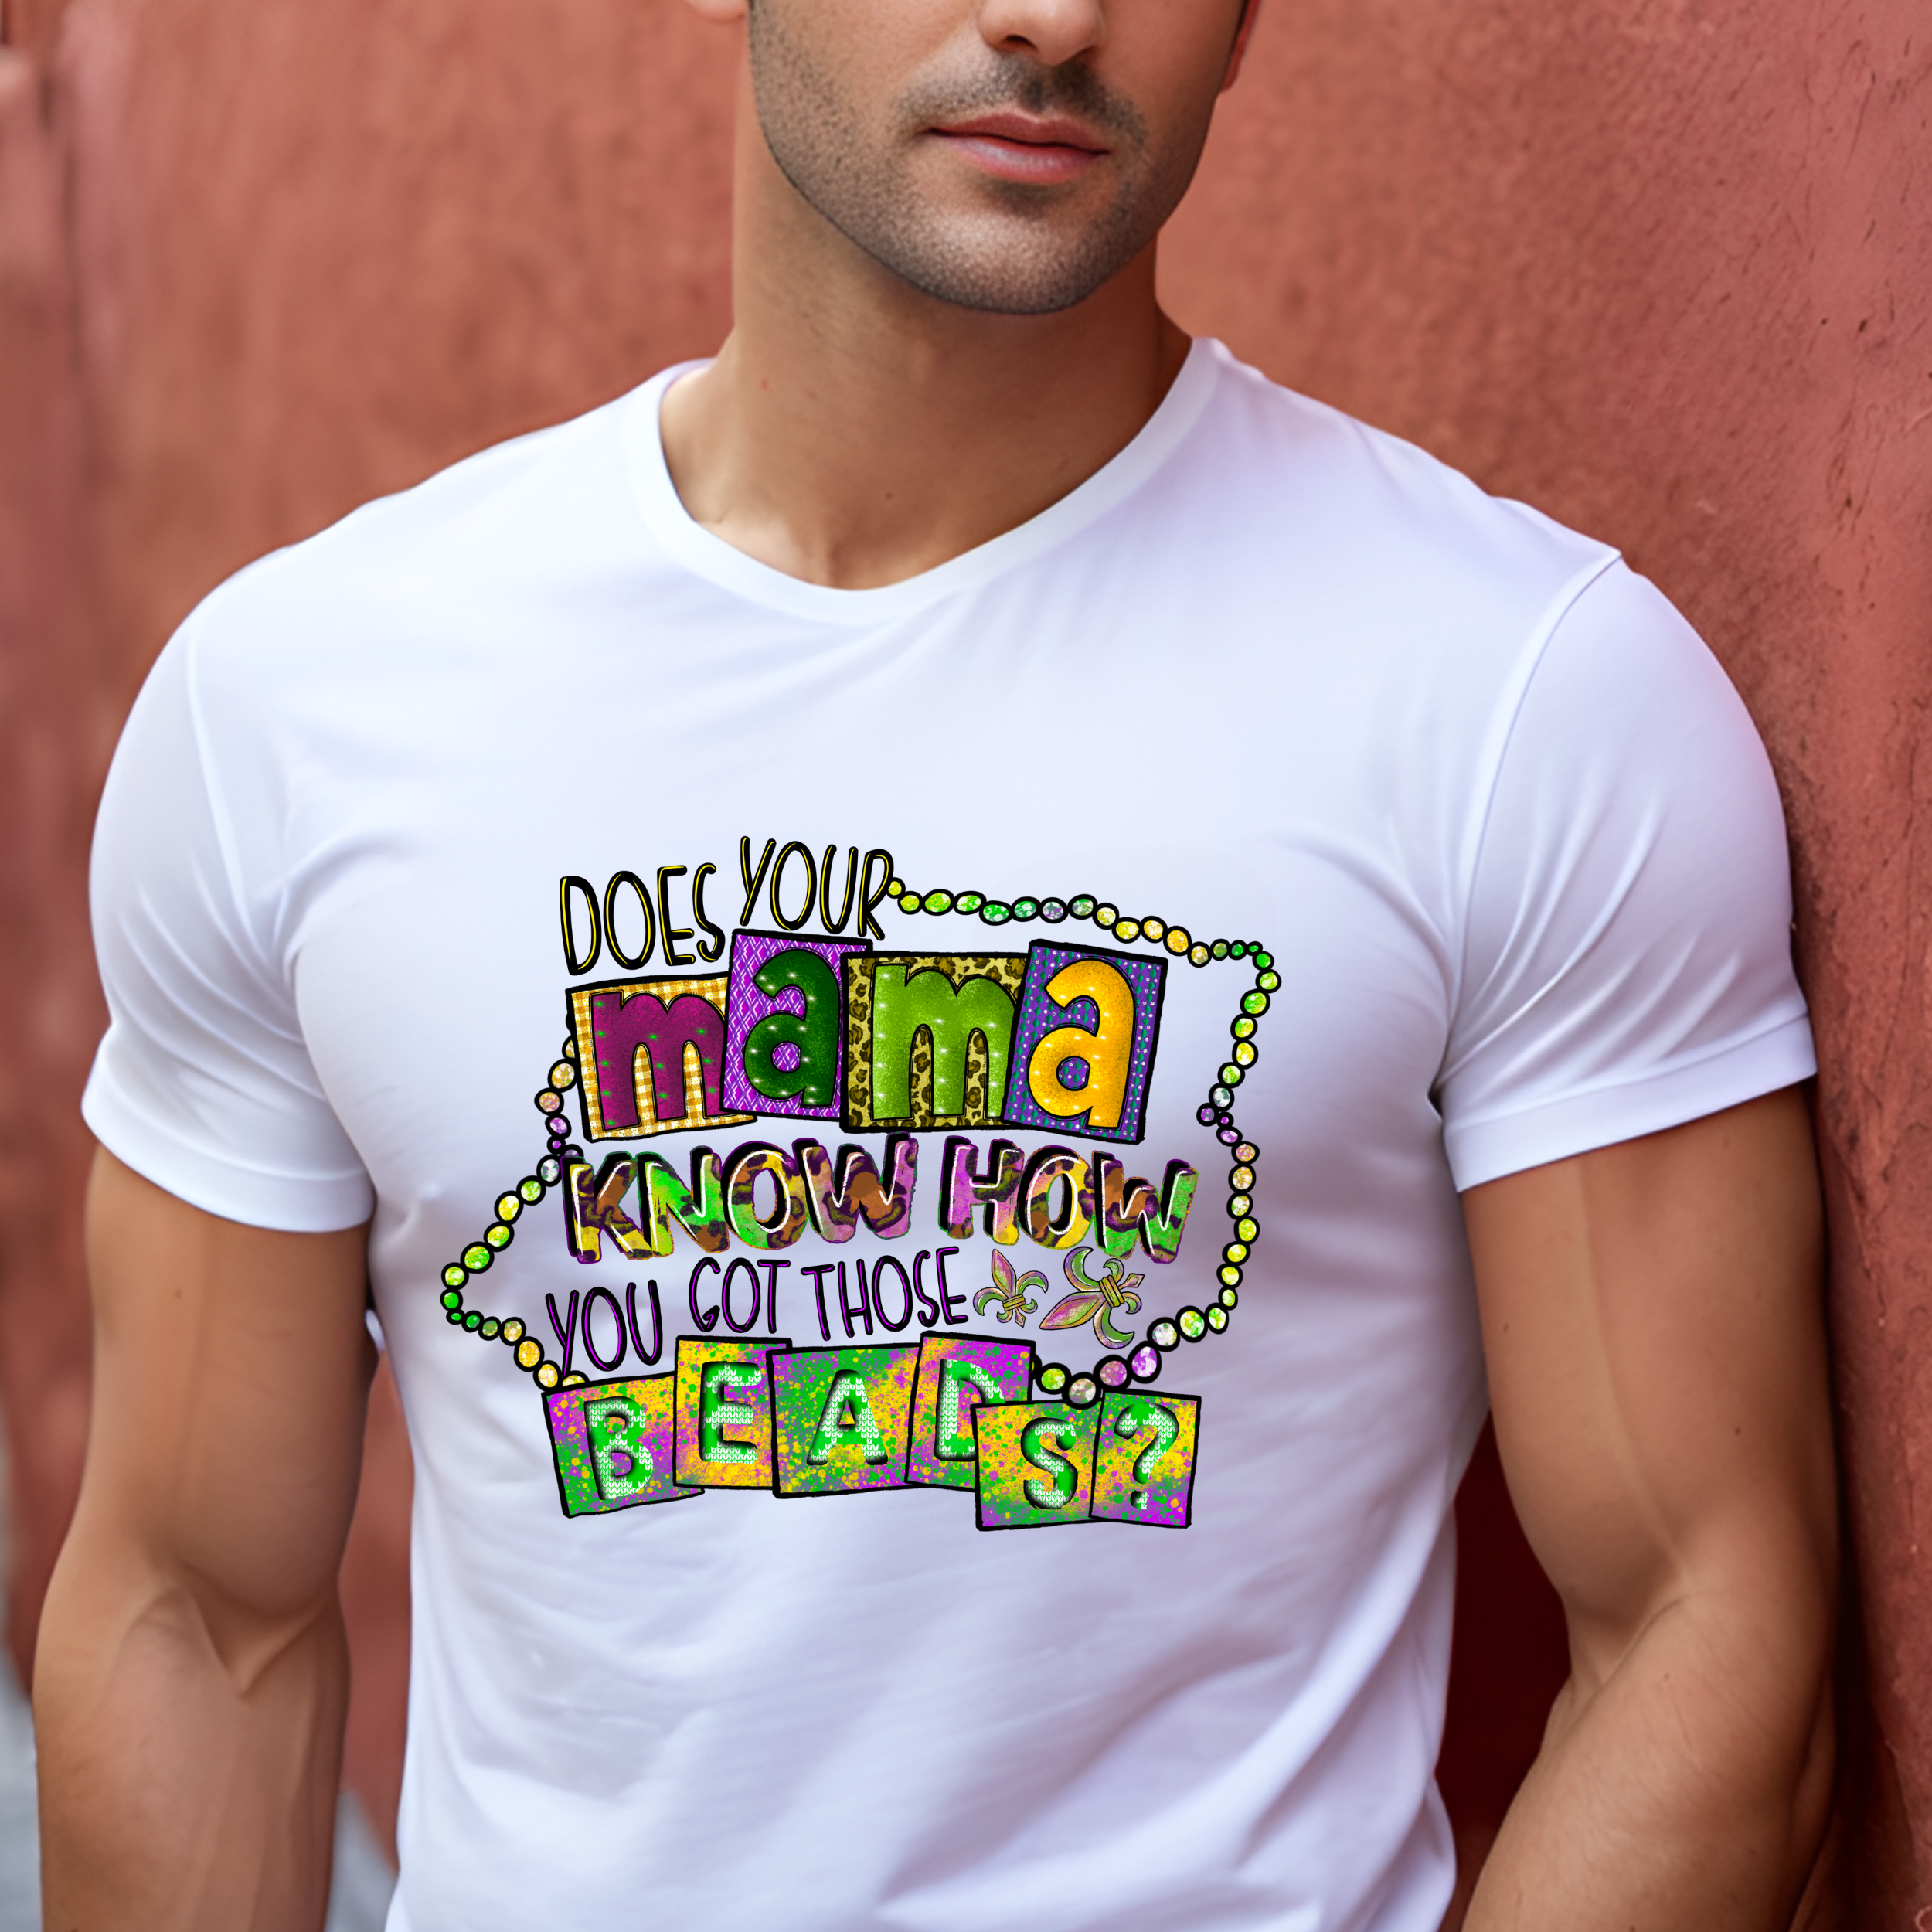 Does Your Mama Know How You Got Those Beads Shirt - Mardi Gras Gift